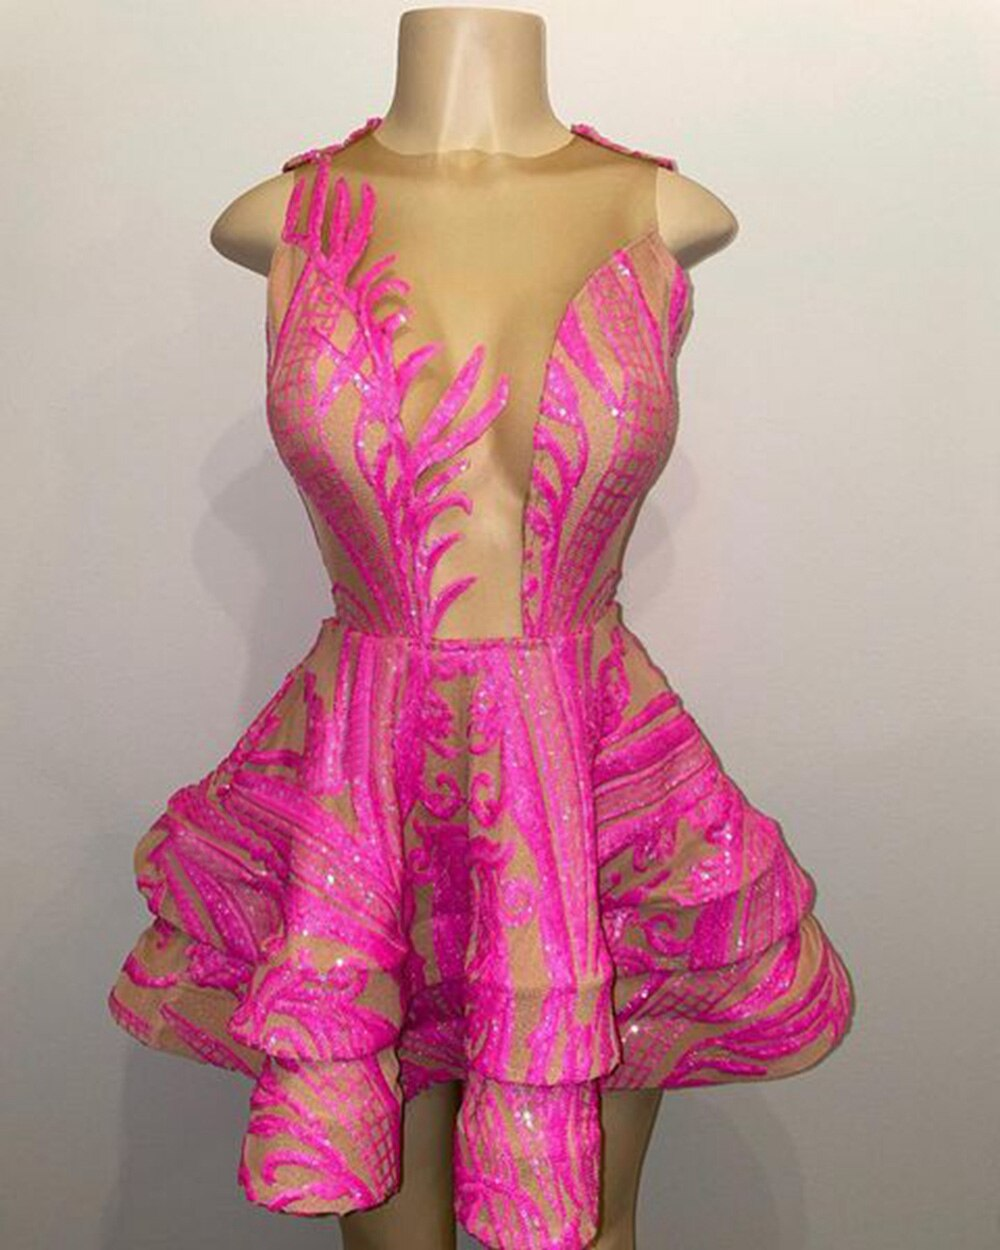 Cute Sheer O-neck Hot Pink Sequin Black Girl Short Prom Dresses 2022 For Birthday Party,MD6969